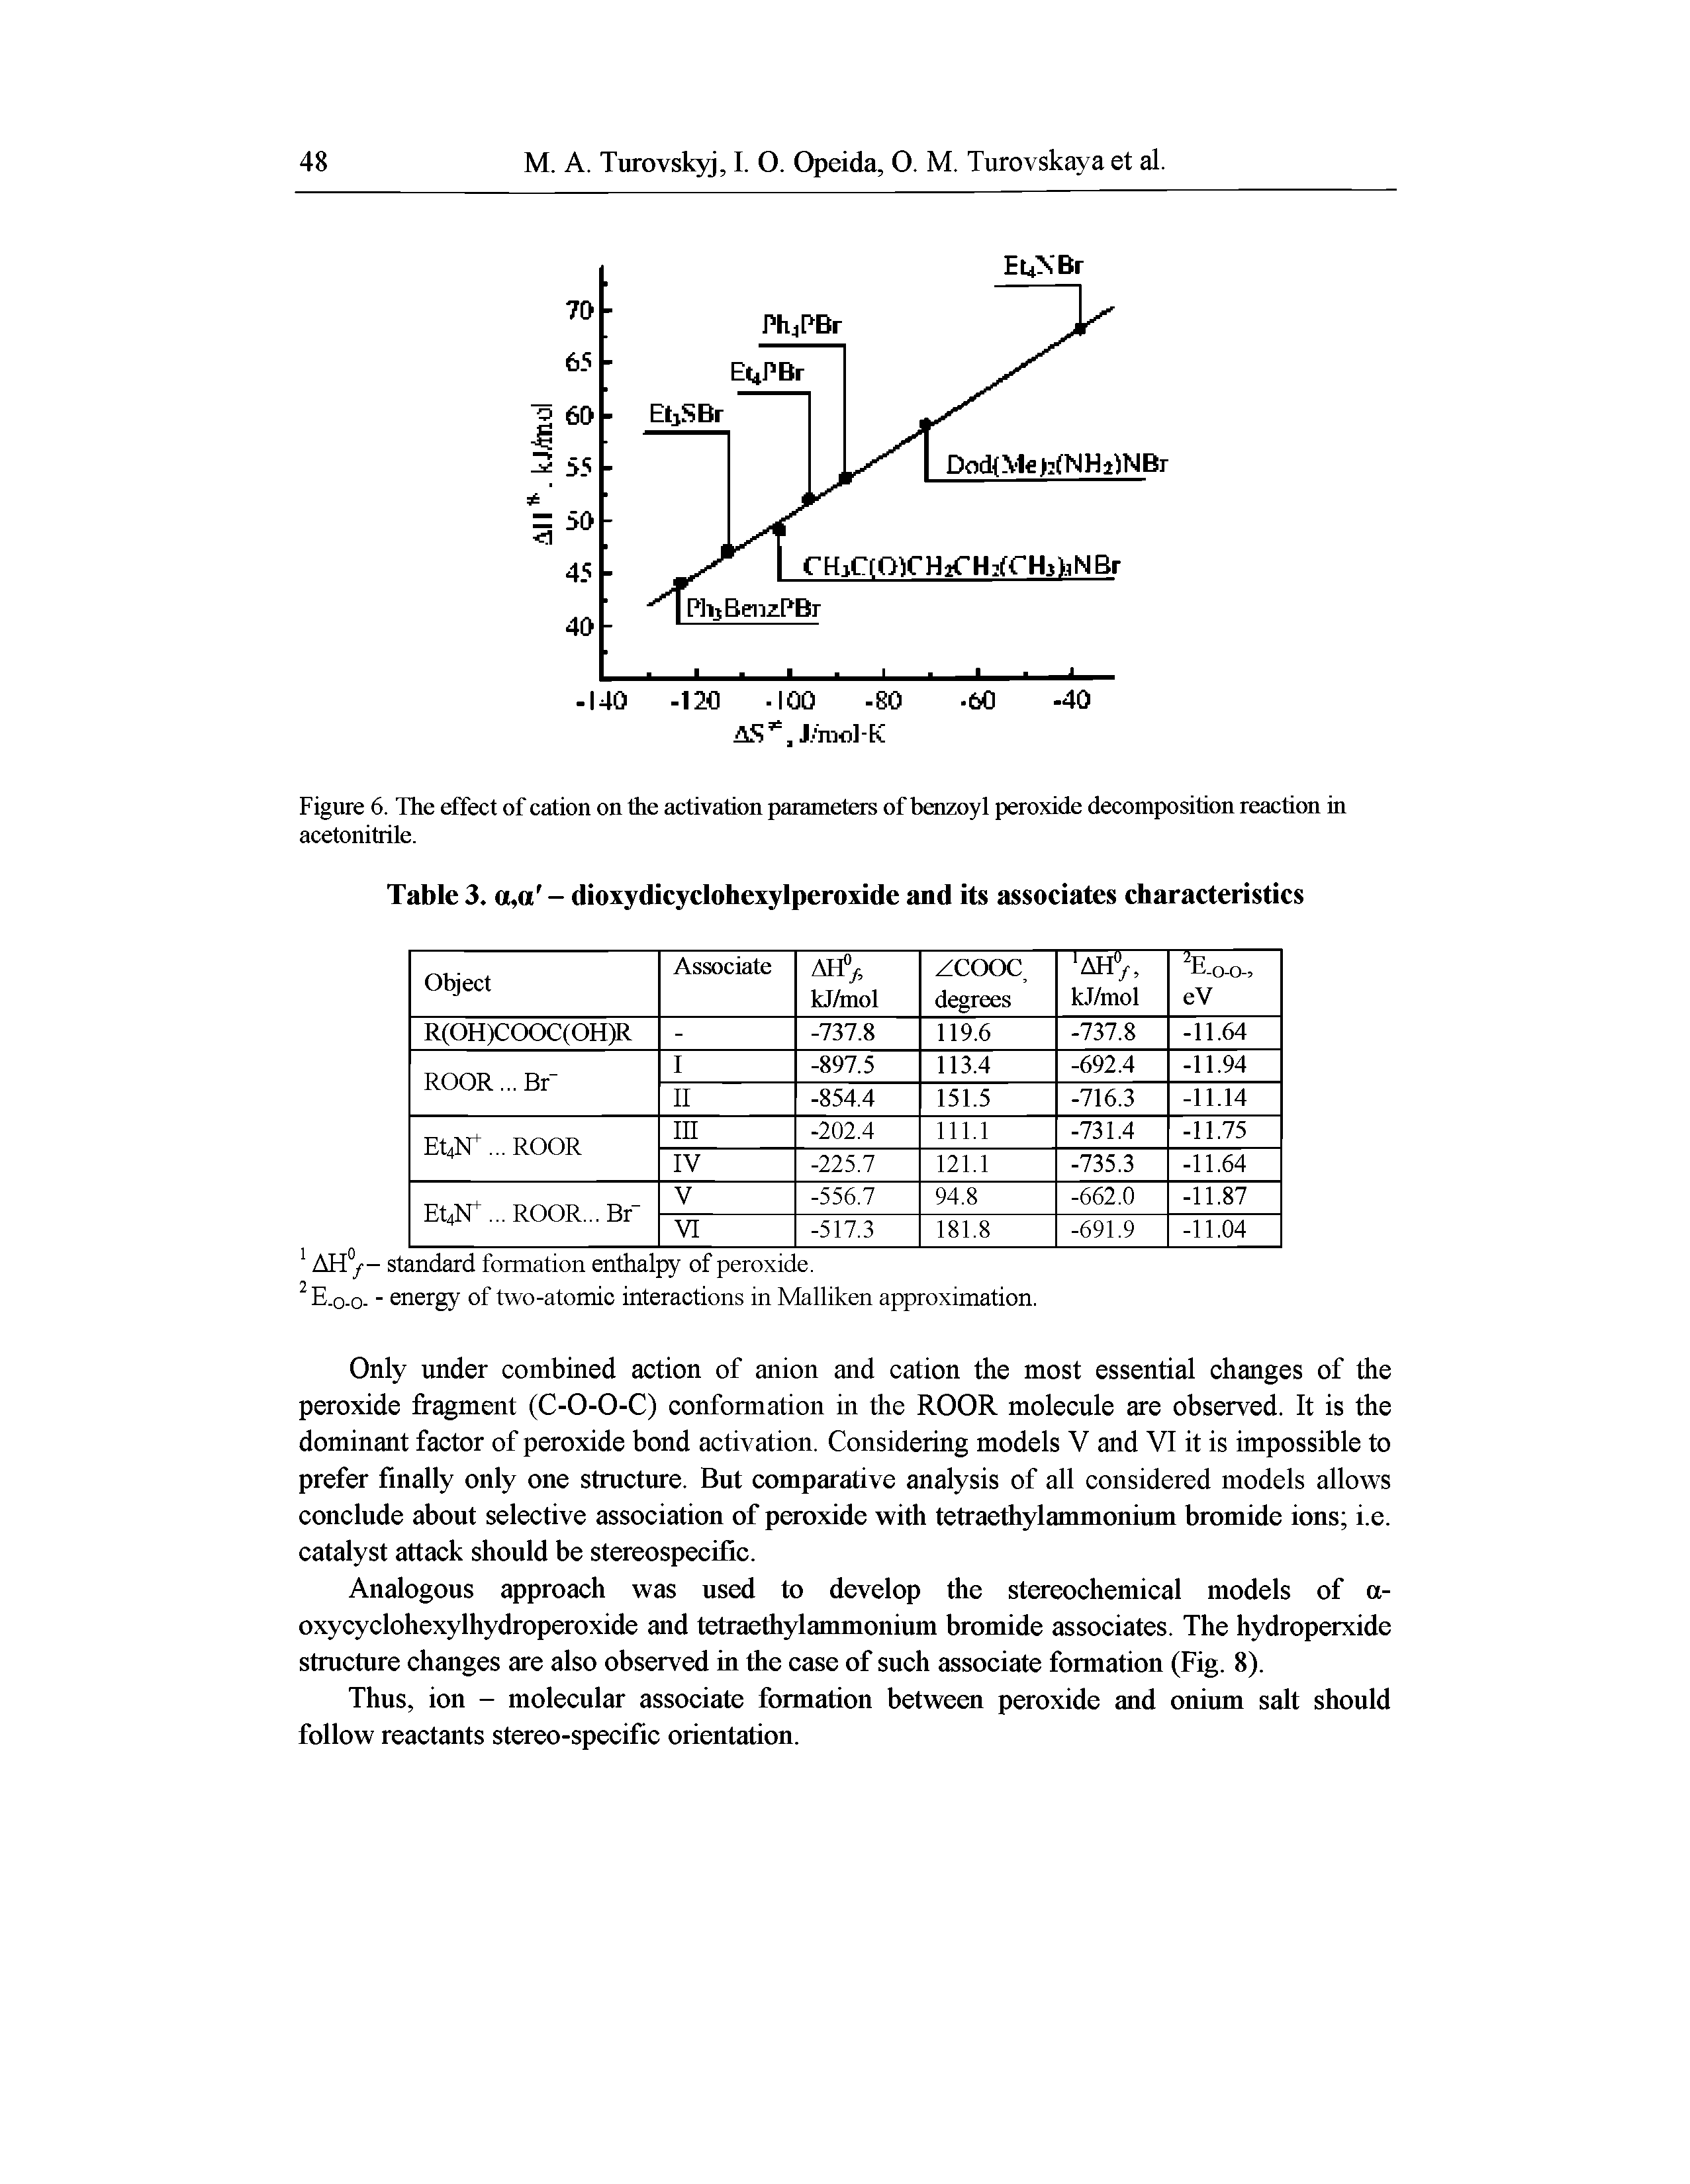 Figure 6. The effect of cation on the activation parameters of benzoyl peroxide decomposition reaction in acetonitrile.